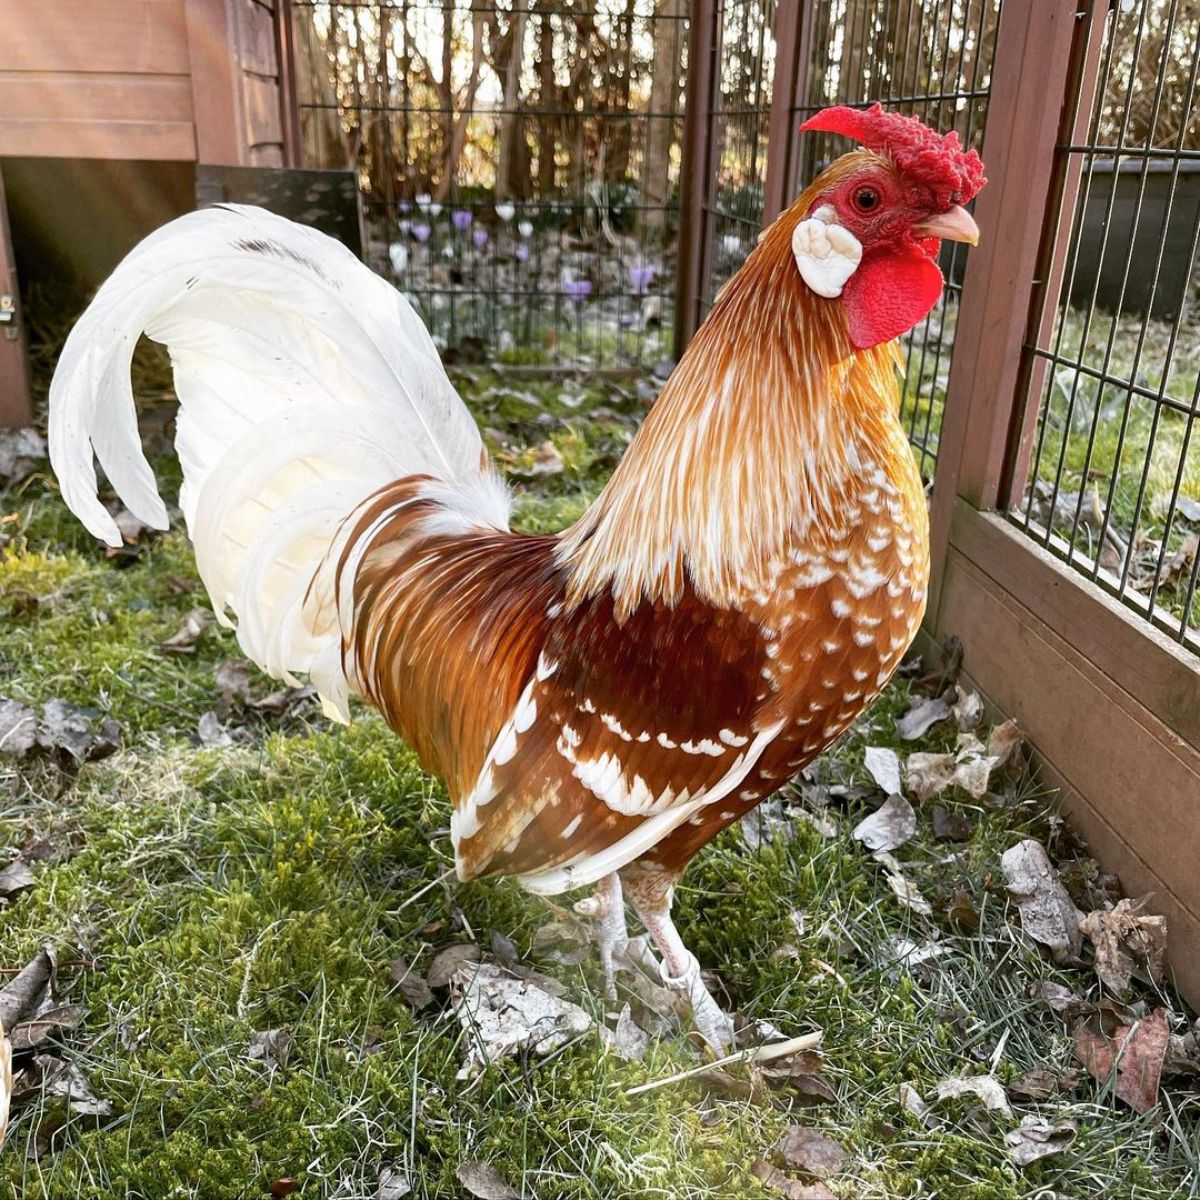 An adorable white.brown Rosecomb rooster in a chicken coop.